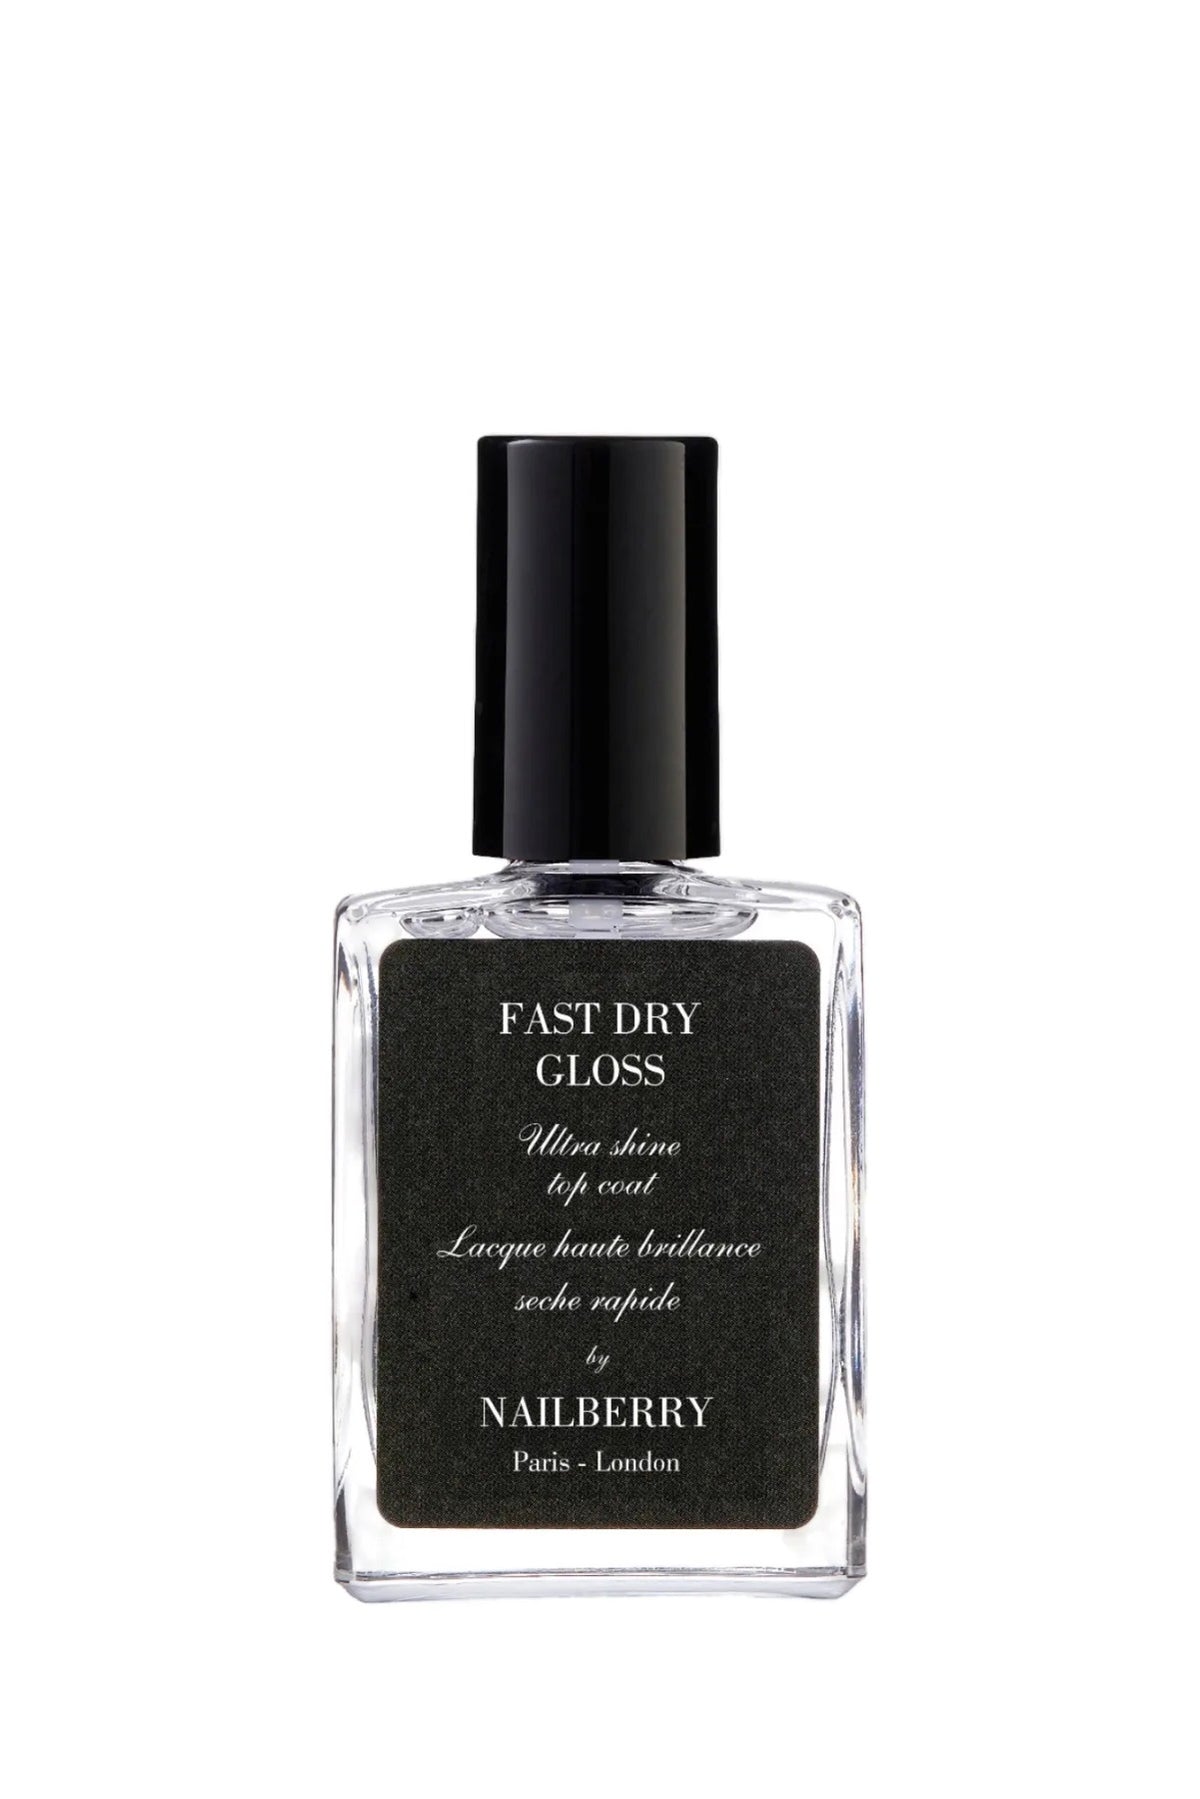 NAILBERRY Fast Dry Gloss Top Coat